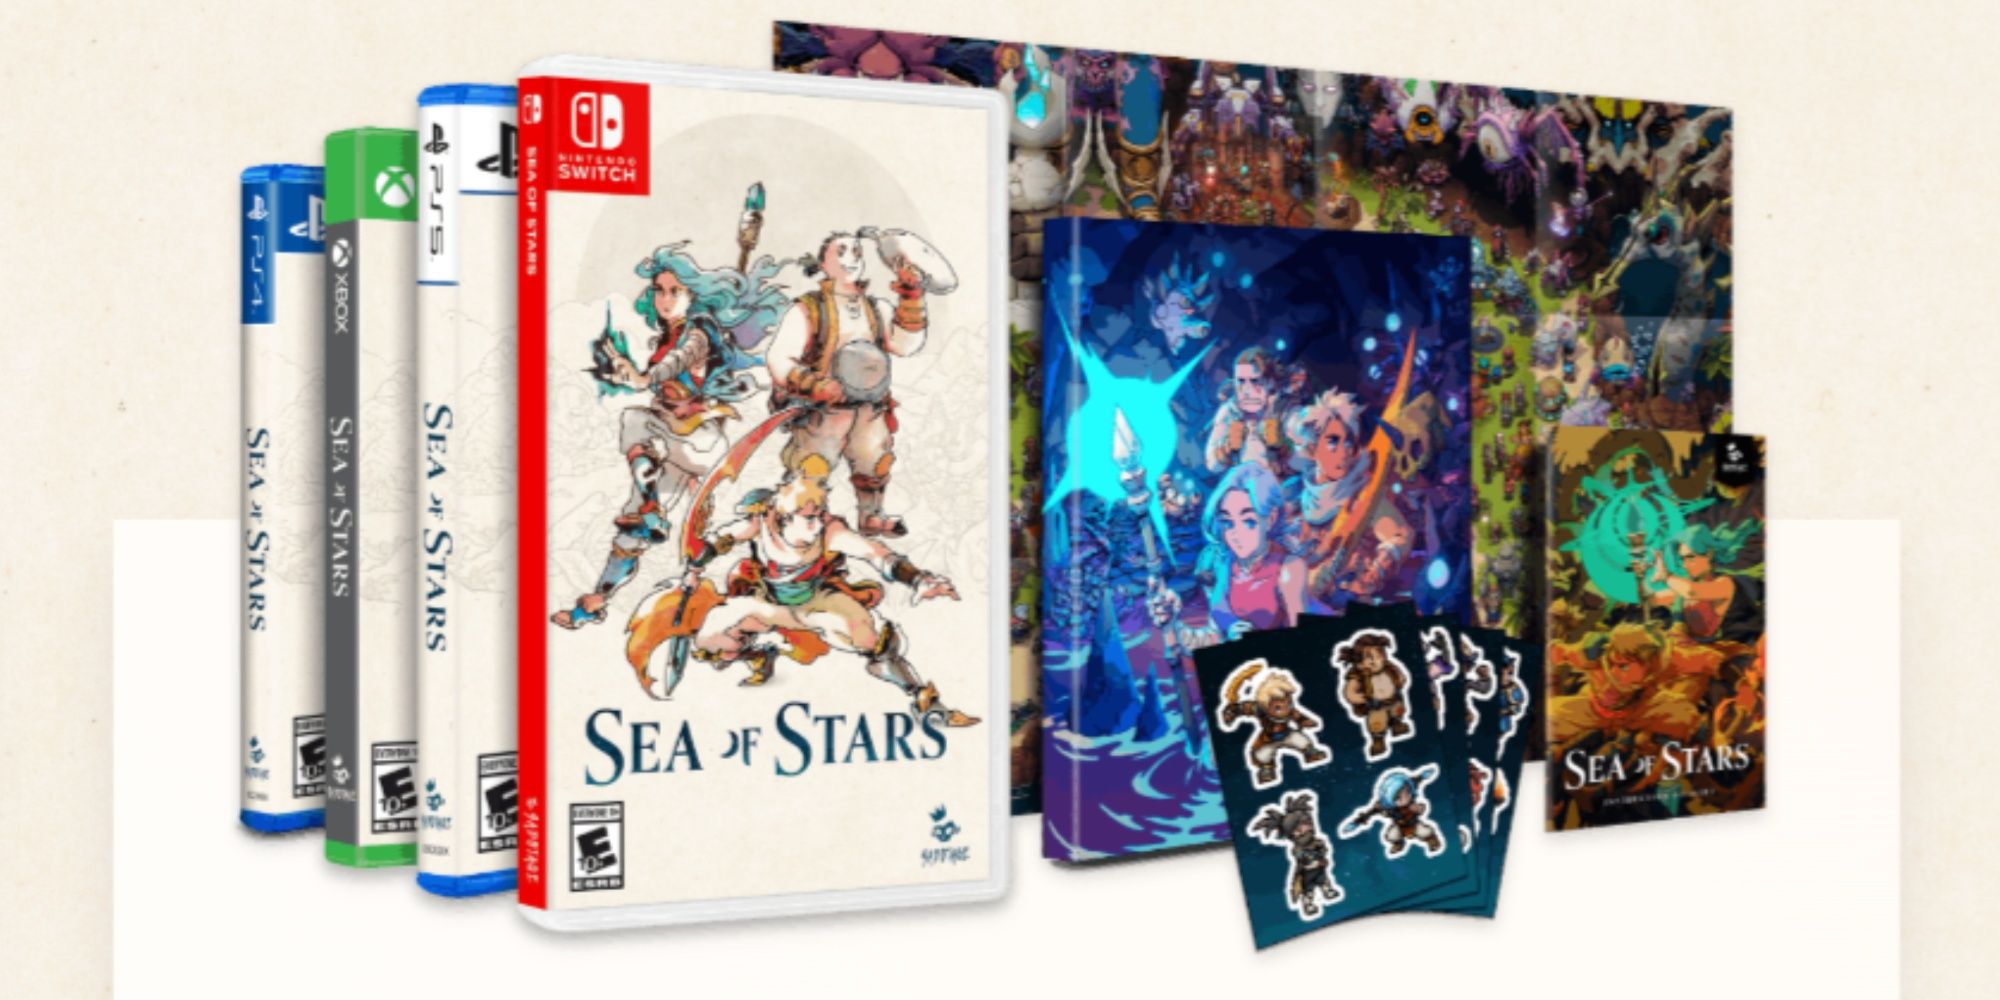 Sea Of Stars Physical Edition Pre-Order Guide